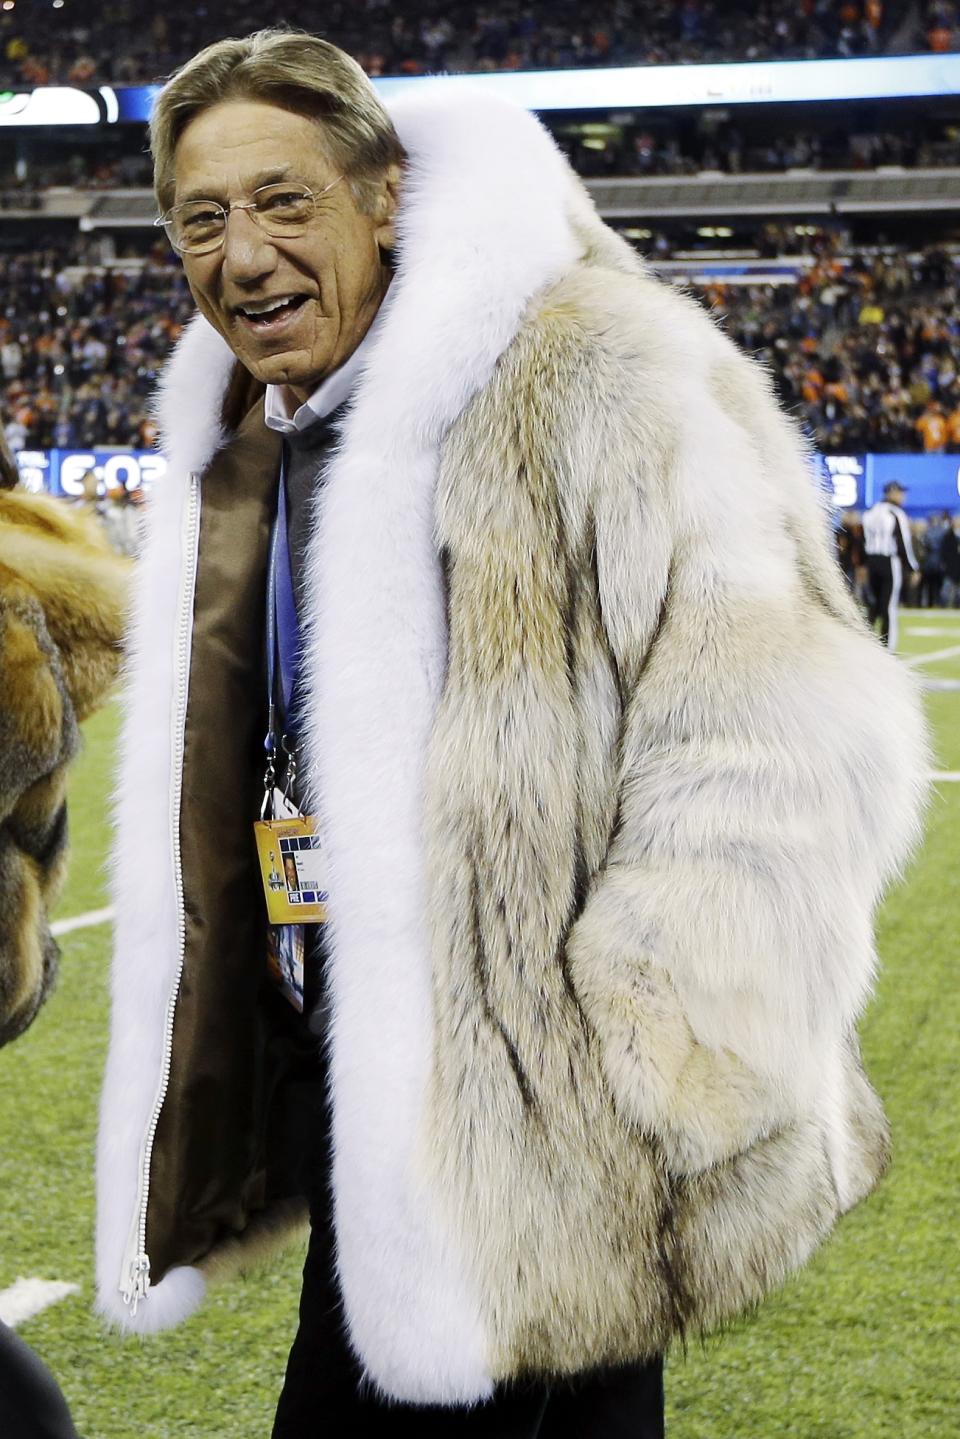 Former New York Jets quarterback Joe Namath walks on the field before the NFL Super Bowl XLVIII football game between the Seattle Seahawks and the Denver Broncos Sunday, Feb. 2, 2014, in East Rutherford, N.J. (AP Photo/Mark Humphrey)